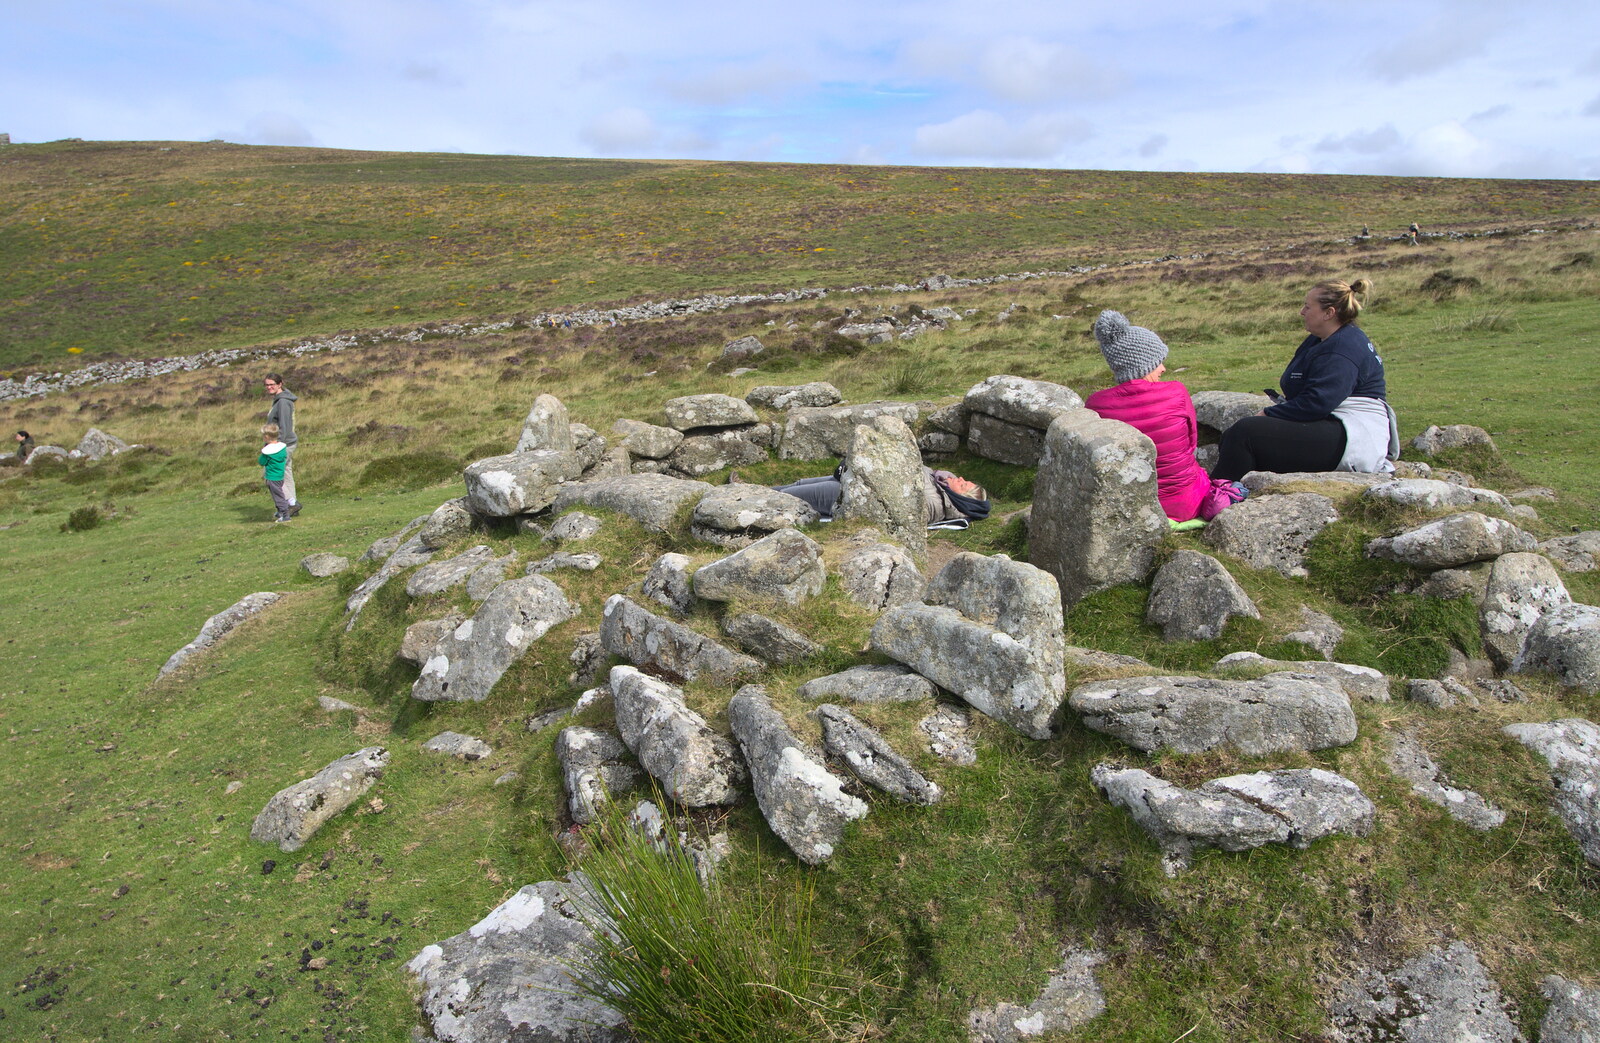 Someone gets spiritual in the stones from Badger's Holt and Bronze-Age Grimspound, Dartmoor, Devon - 10th August 2016